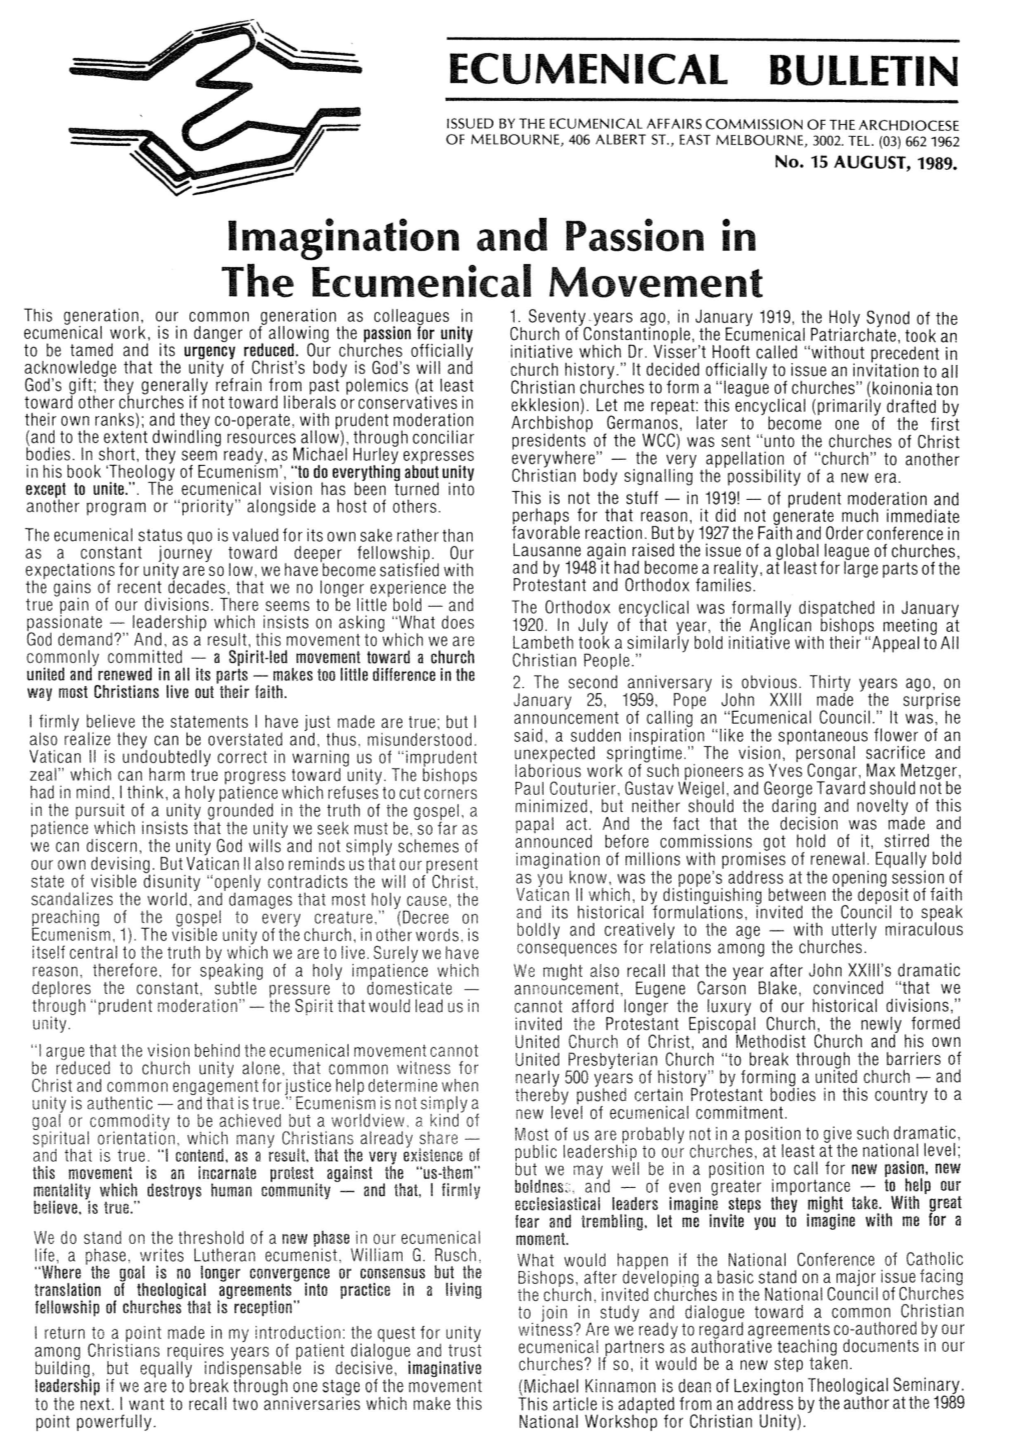 ECUMENICAL BULLETIN Imagination and Passion in the Ecumenical